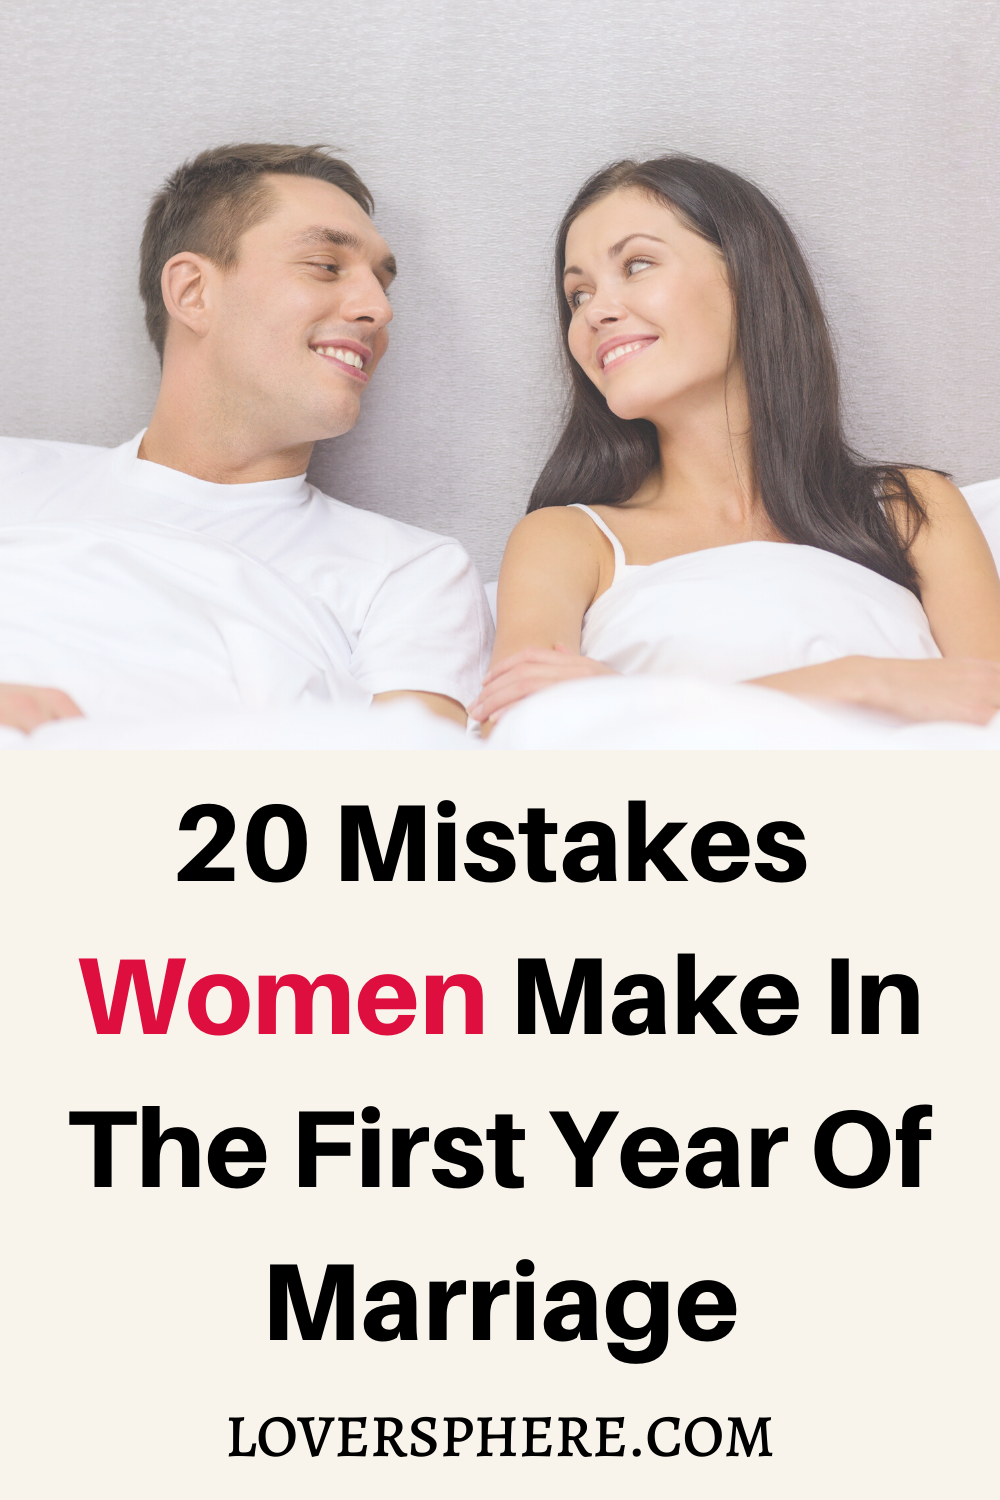 Mistakes women make in the first year of marriage